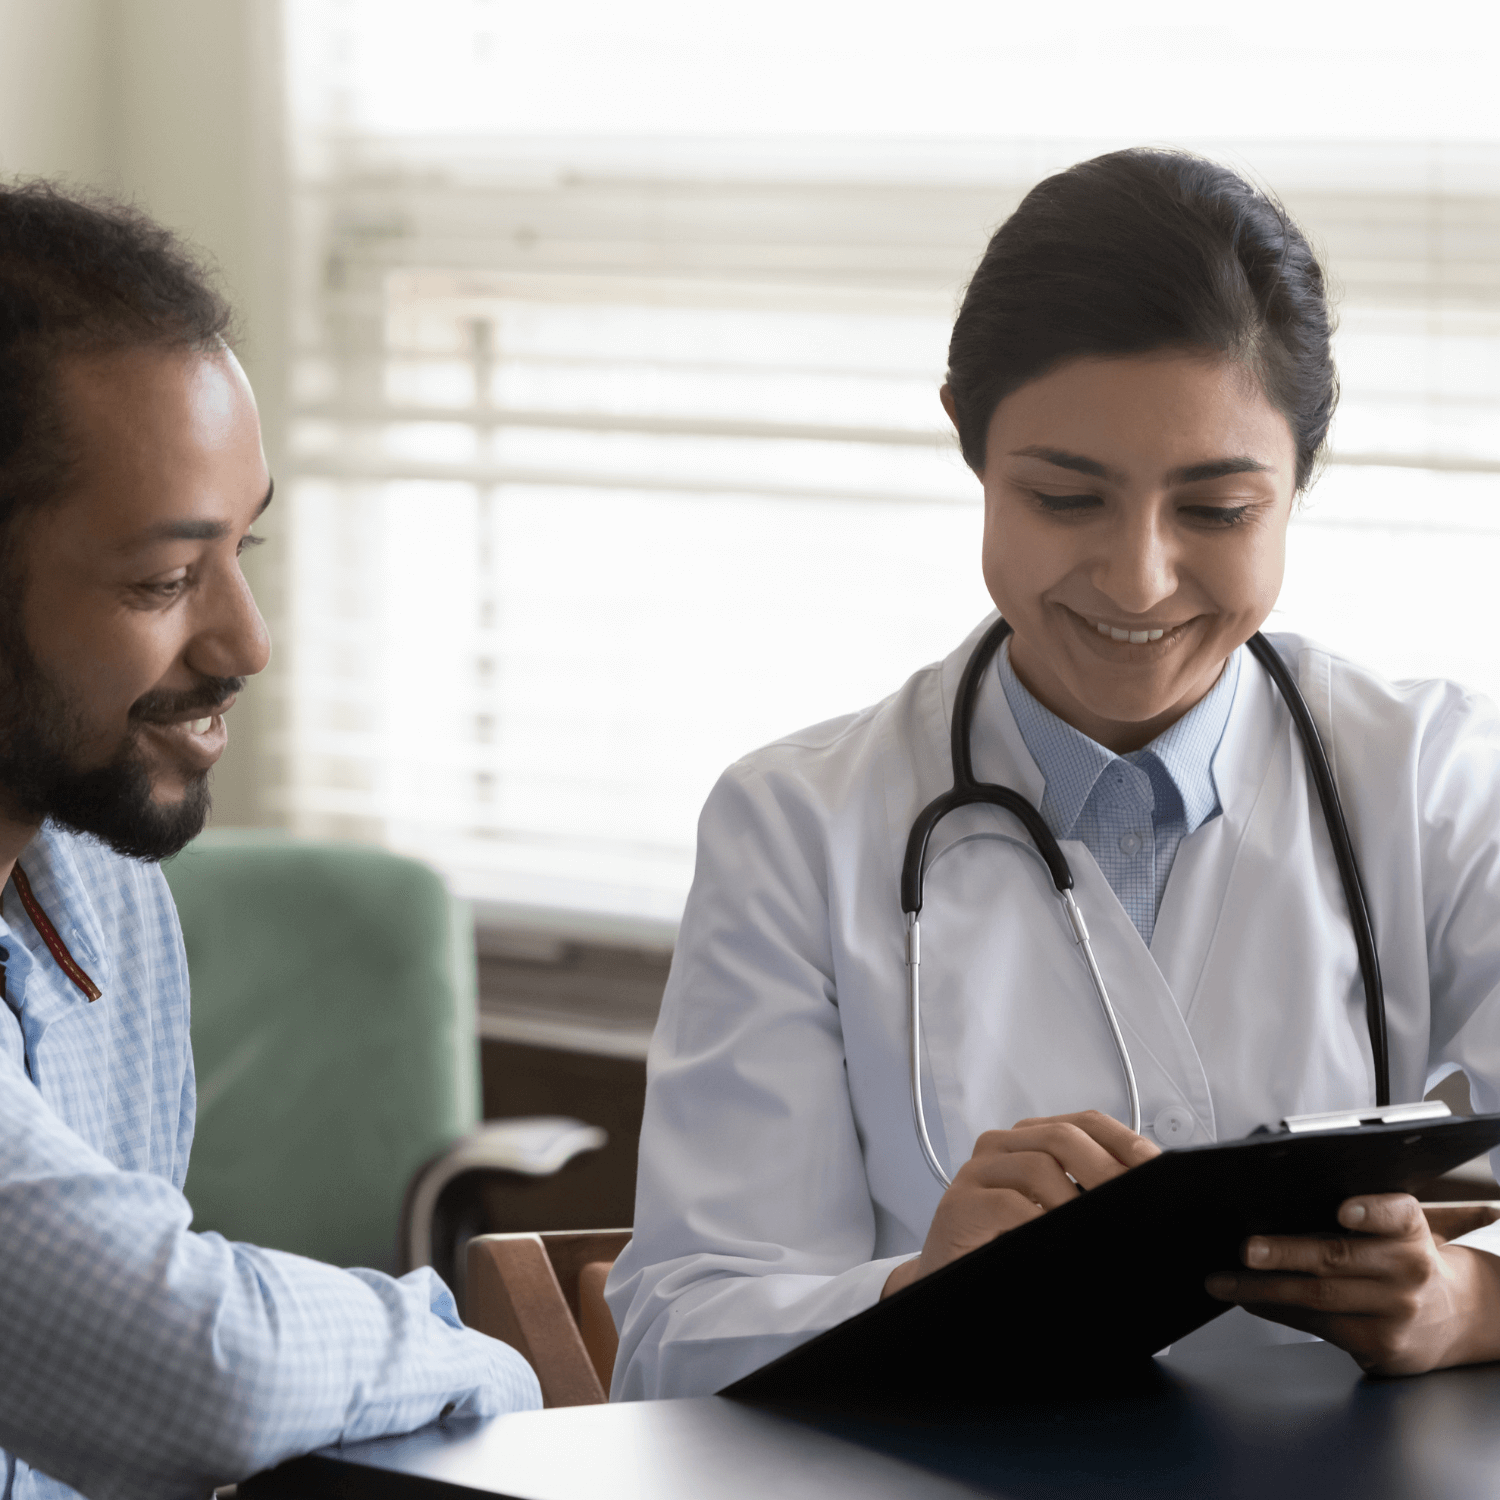 Image of female health care provider talking with a male patient, in front of a tablet.